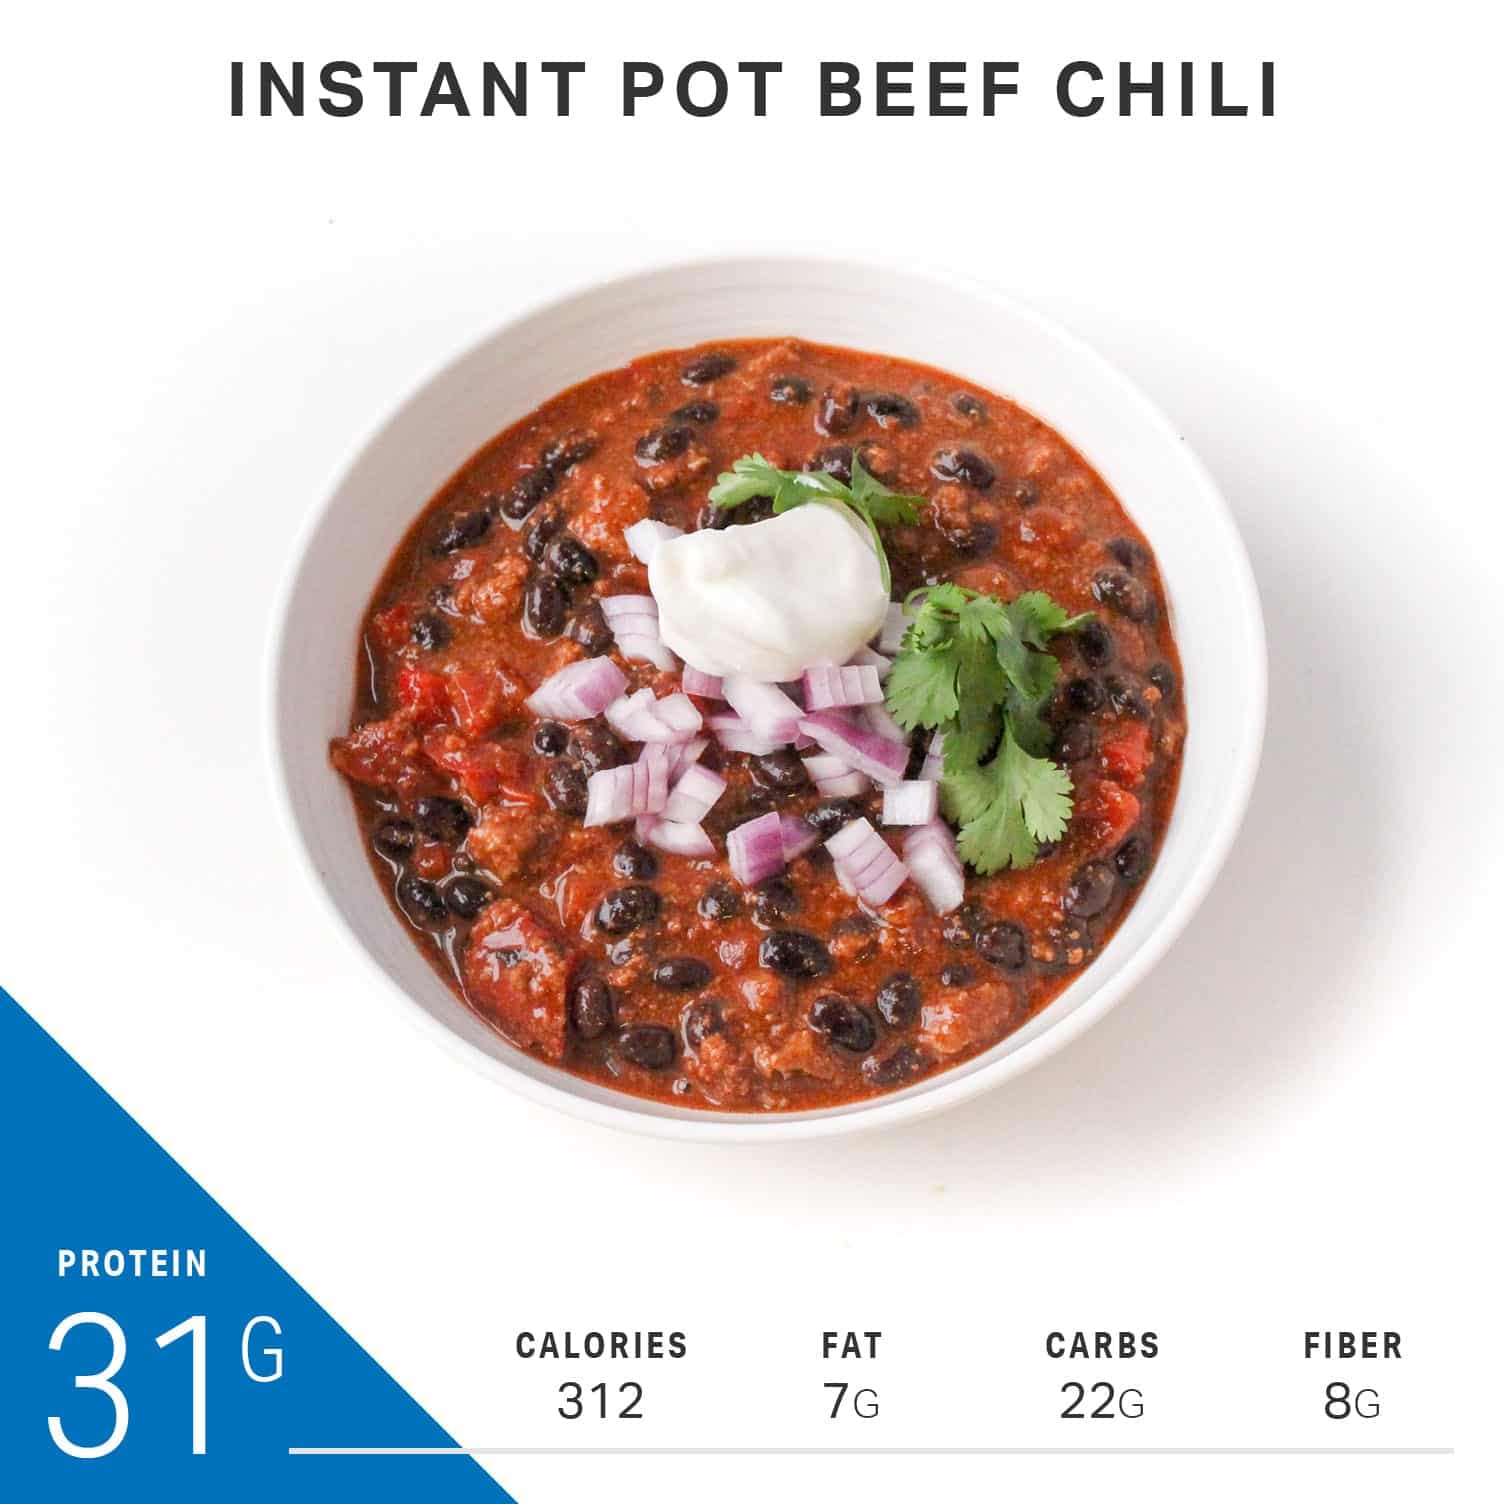 What Instant Pot Meals With 30 Grams of Protein Look Like | Nutrition ...